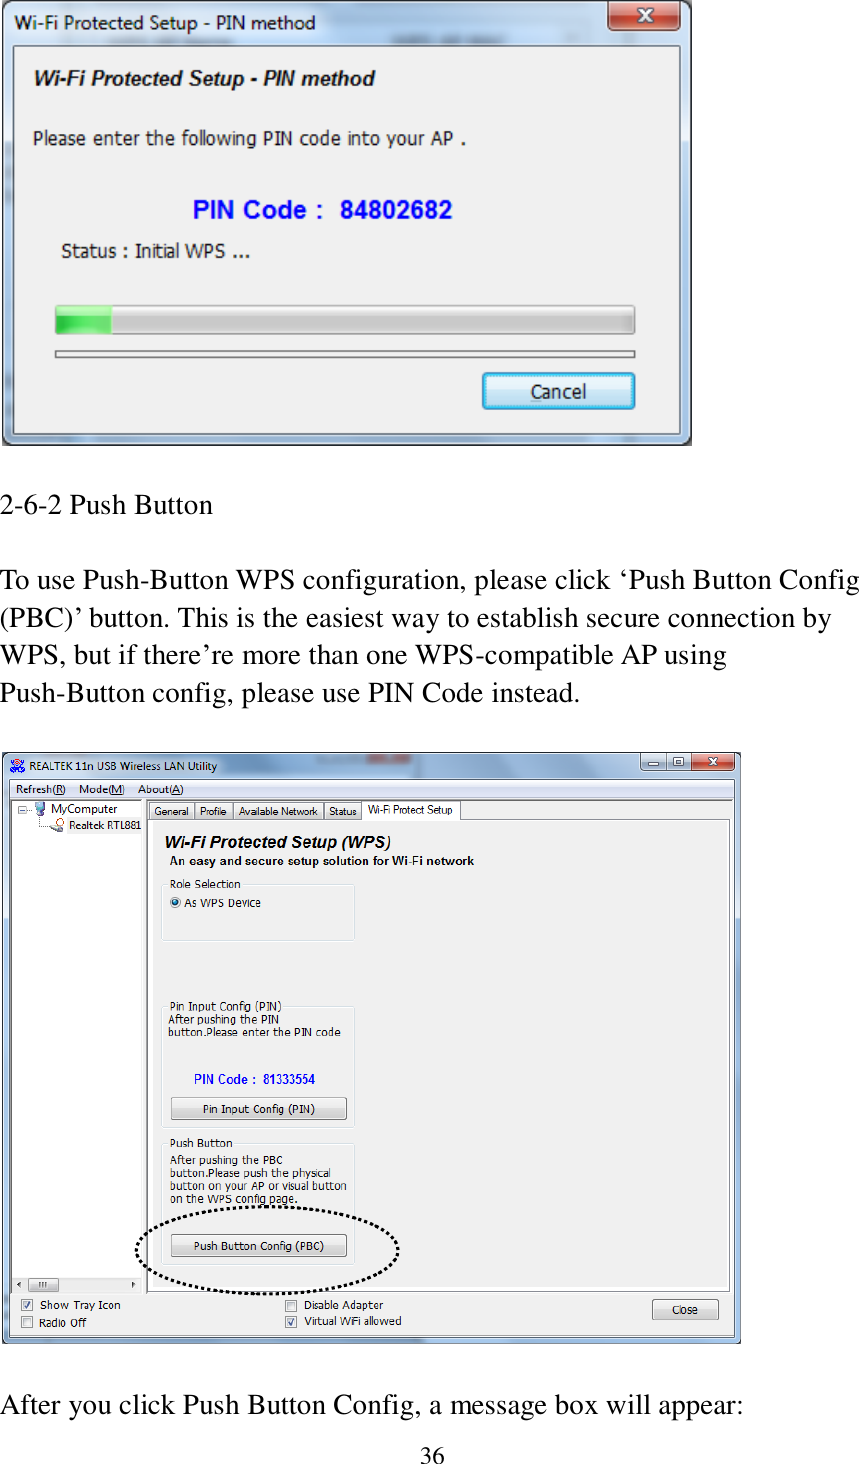 36      2-6-2 Push Button  To use Push-Button WPS configuration, please click ‘Push Button Config (PBC)’ button. This is the easiest way to establish secure connection by WPS, but if there’re more than one WPS-compatible AP using Push-Button config, please use PIN Code instead.    After you click Push Button Config, a message box will appear: 